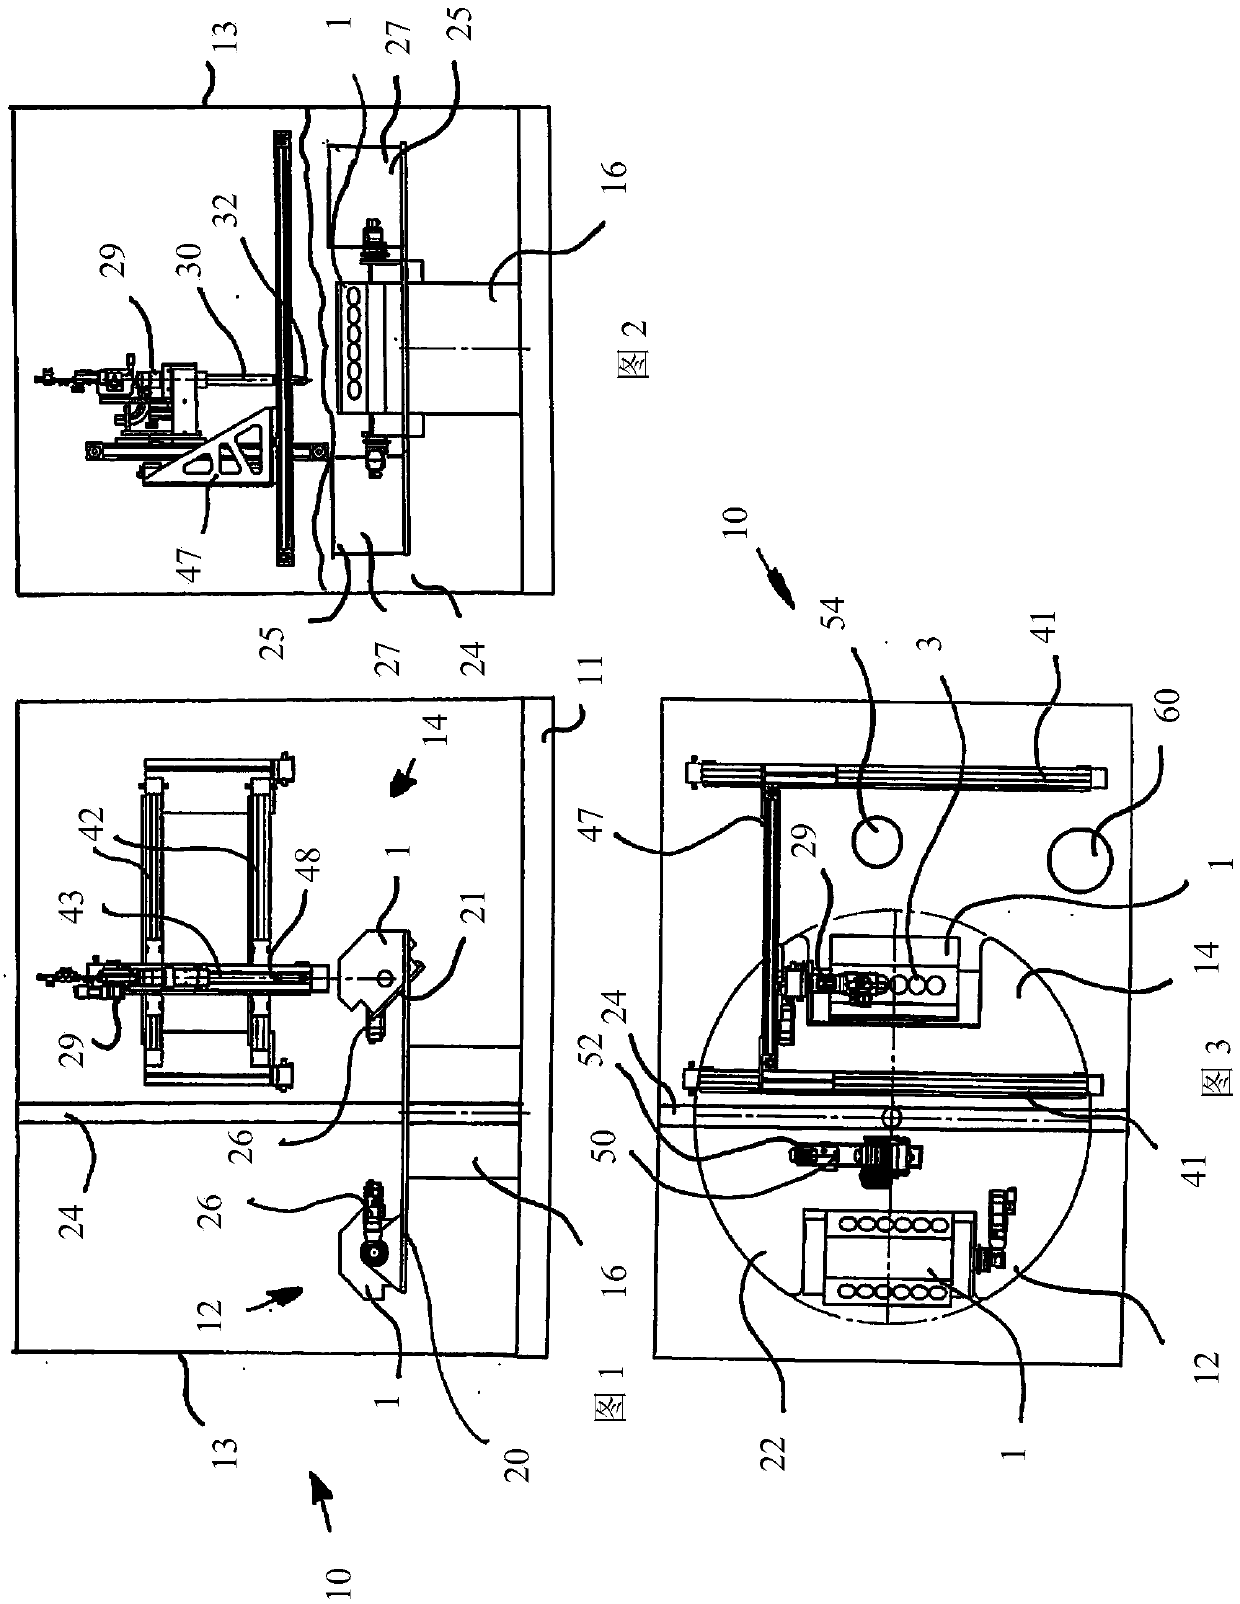 Apparatus and method for metal coating of workpieces